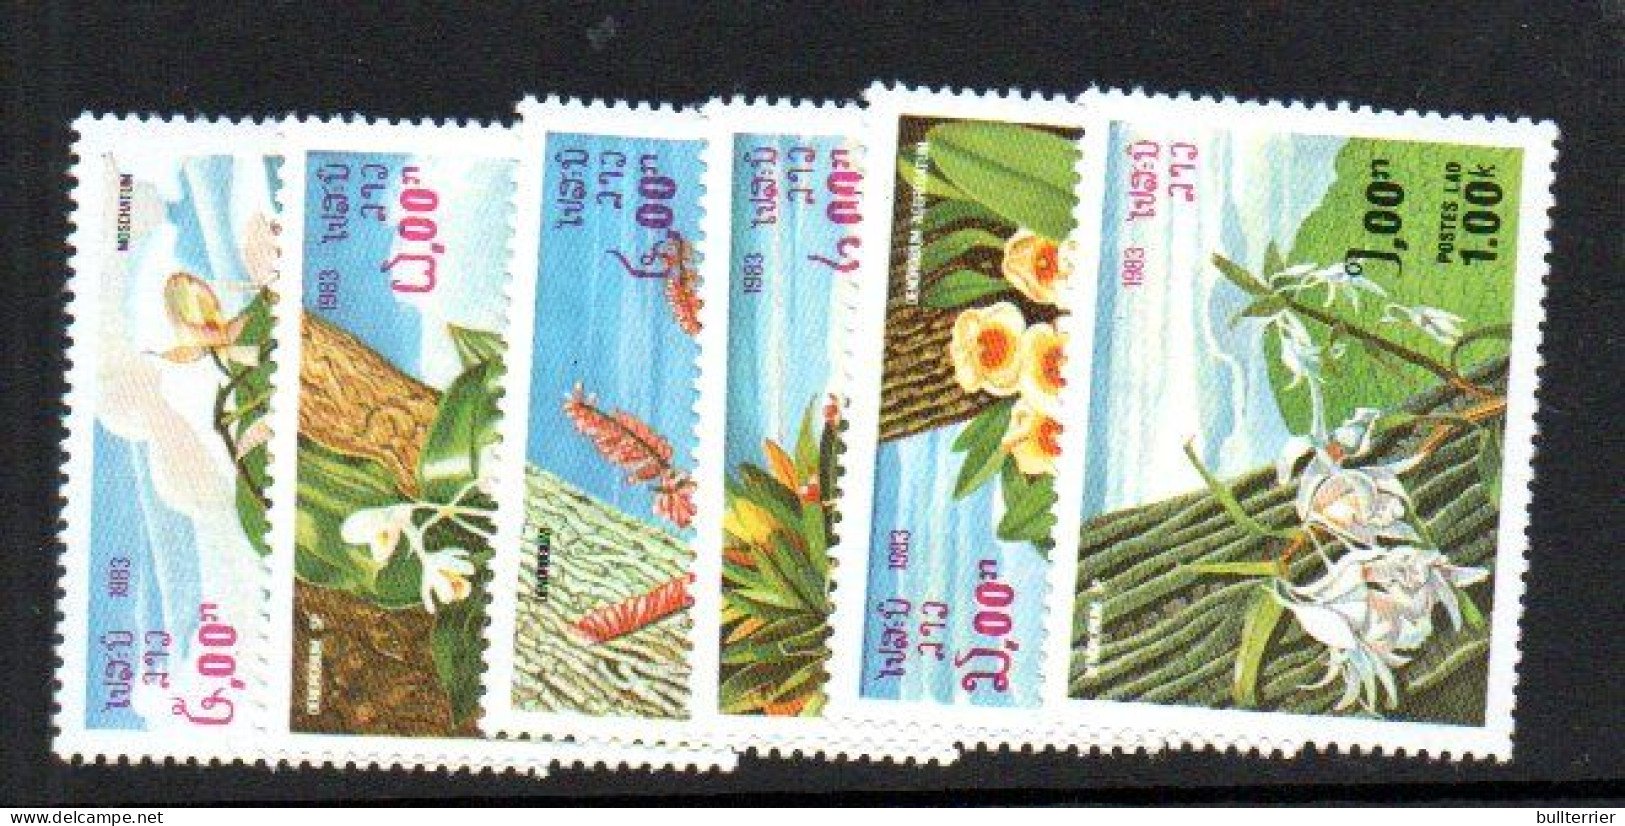 LAOS - 1983 - NATIVE FLOWERS SET OF 6  MINT NEVER HINGED, - Laos